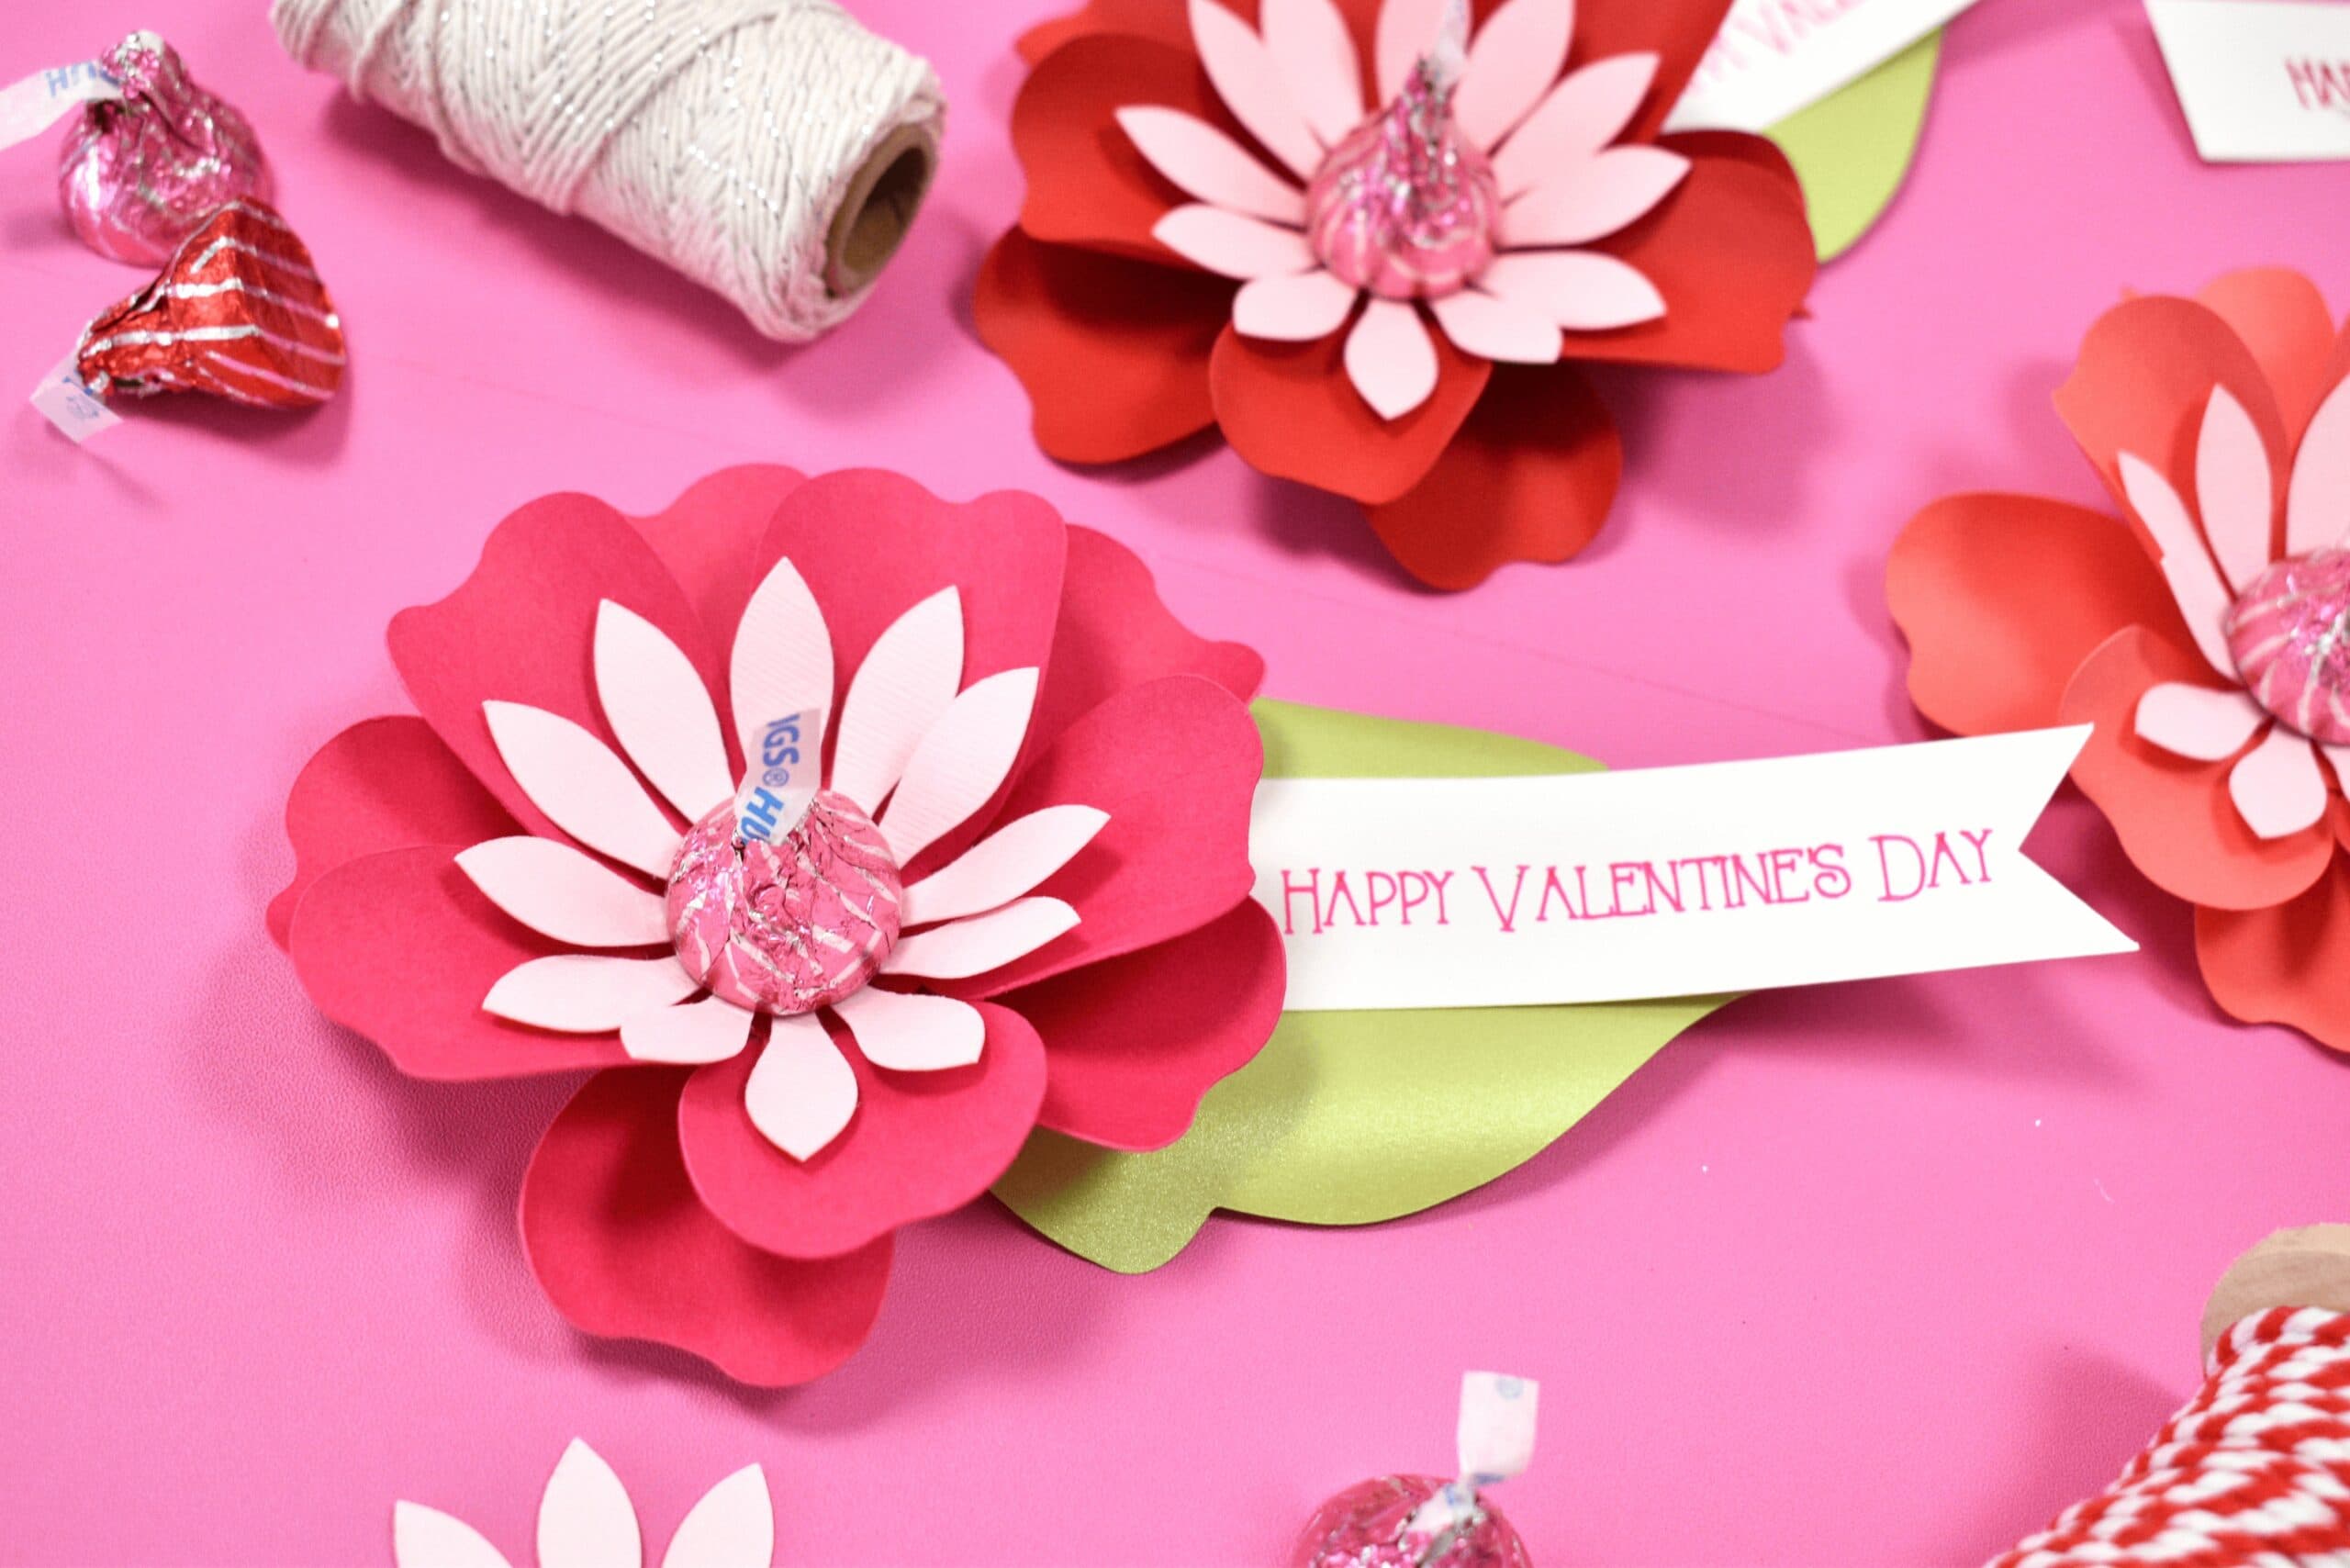 DIY Paper Flower Kiss Candy Valentines Craft – Free Printable Flower Templates and SVG Cut Files